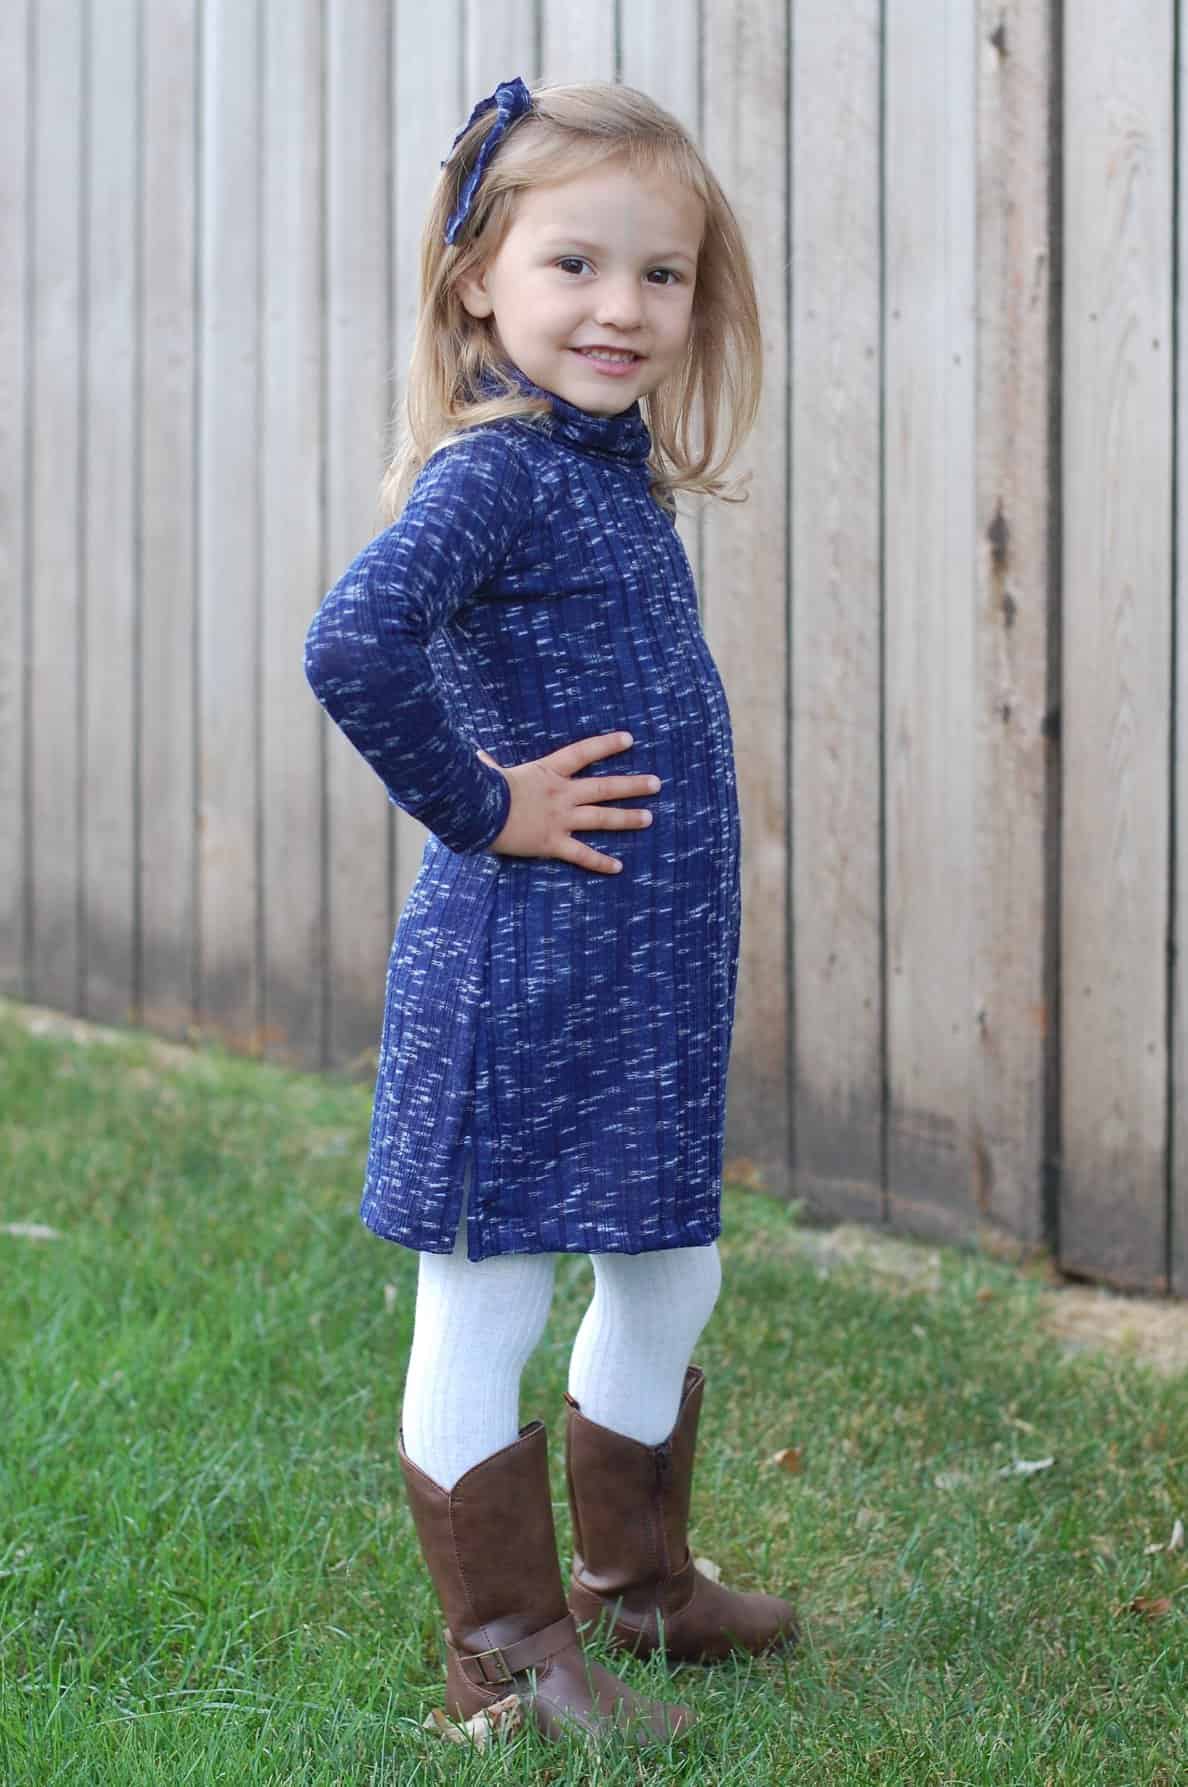 Hepburn Top and Dress : : New Pattern Release!! - Patterns for Pirates